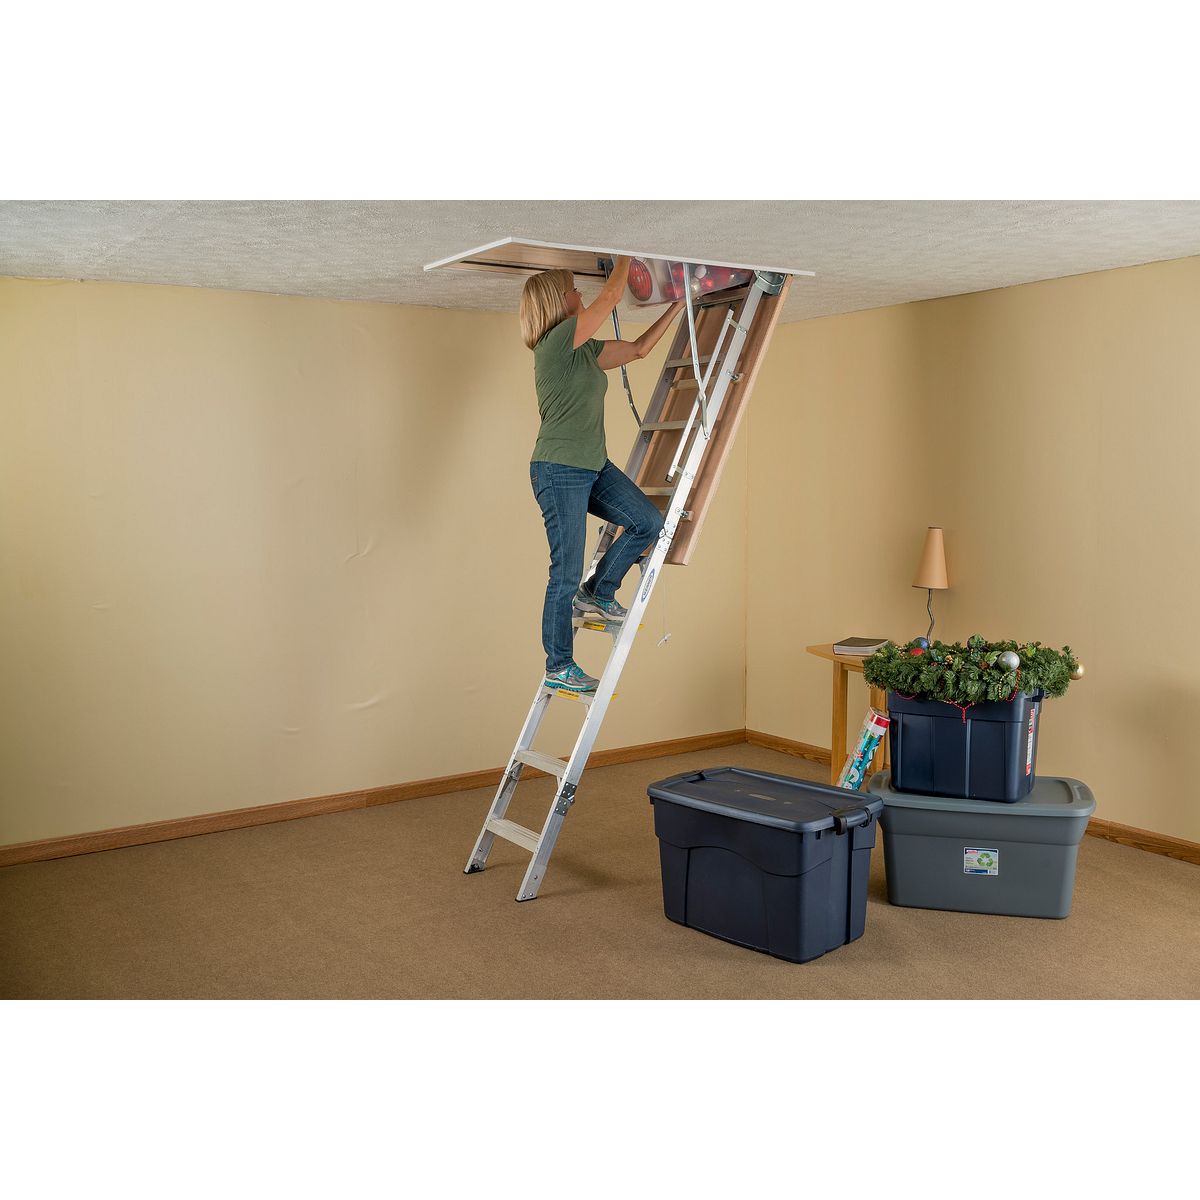 Werner Attic Ladder S2208 Manual Image Balcony and Attic